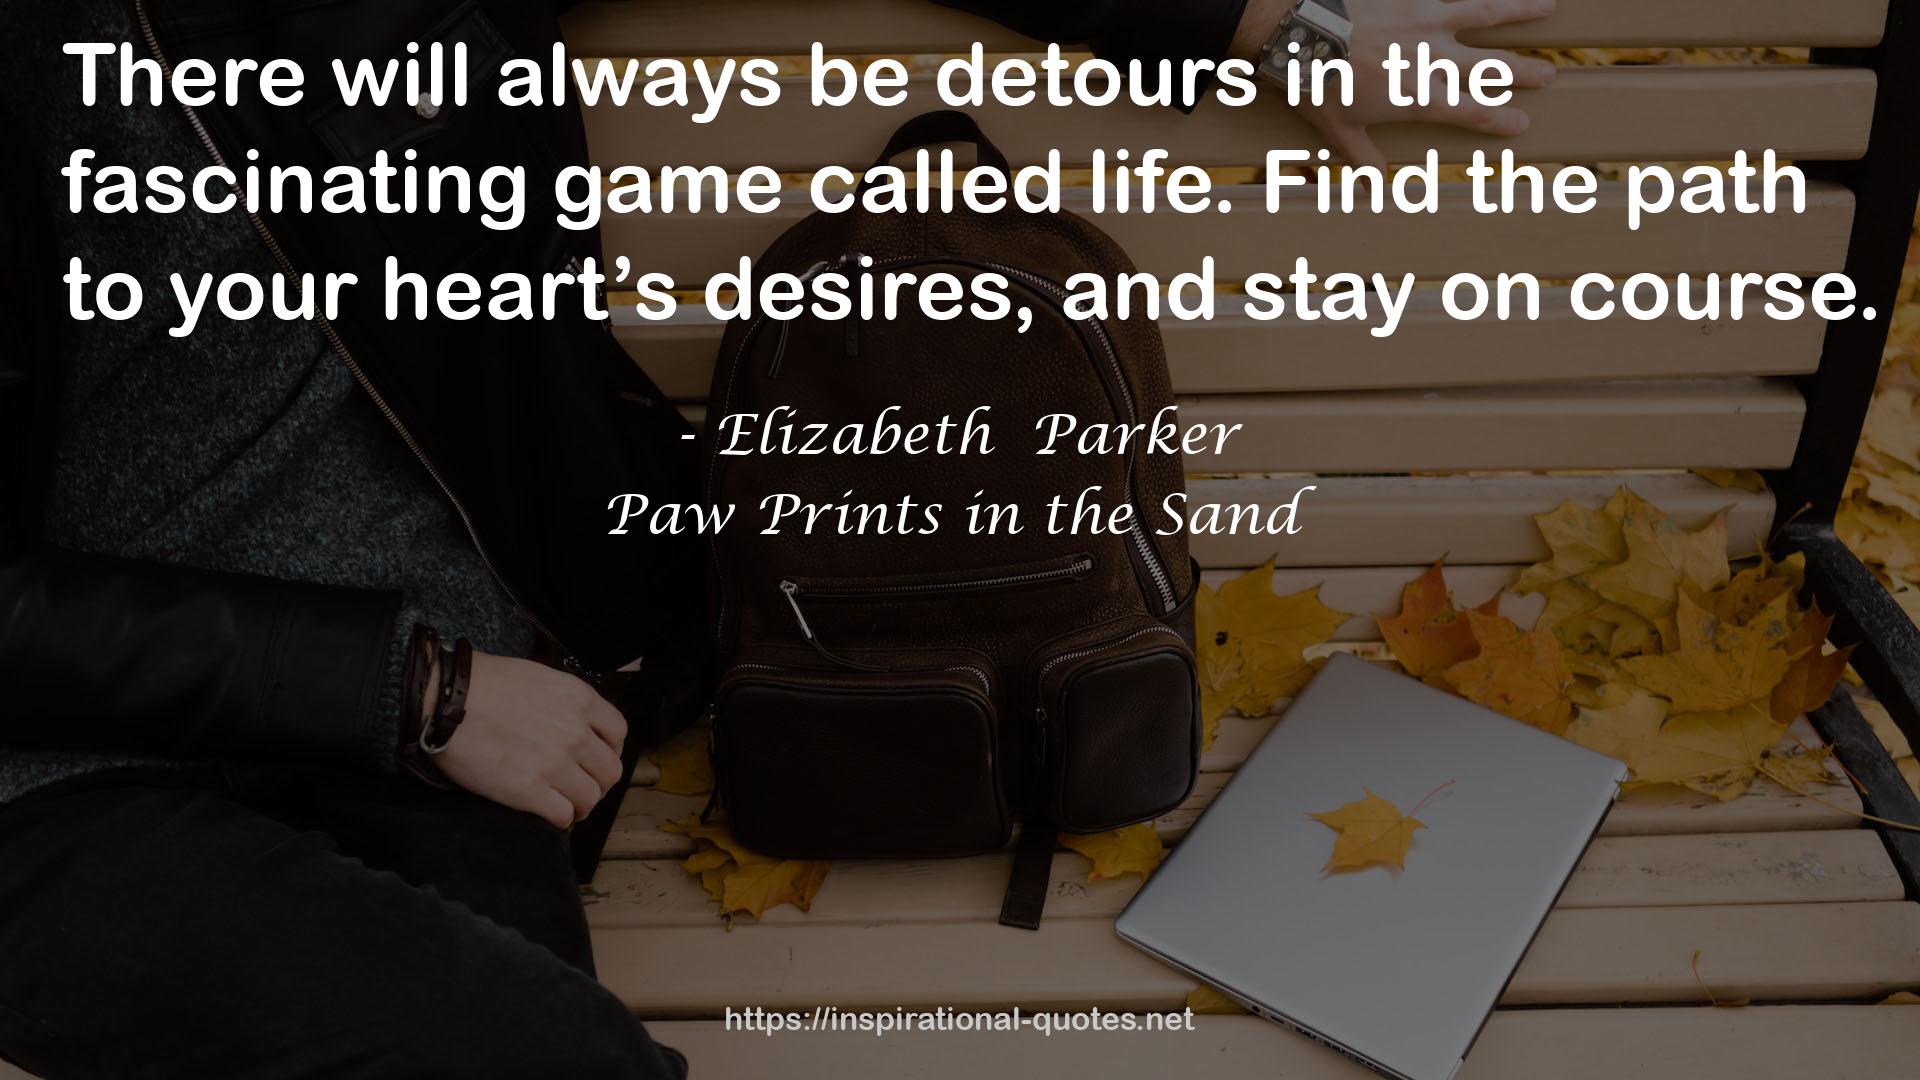 Paw Prints in the Sand QUOTES